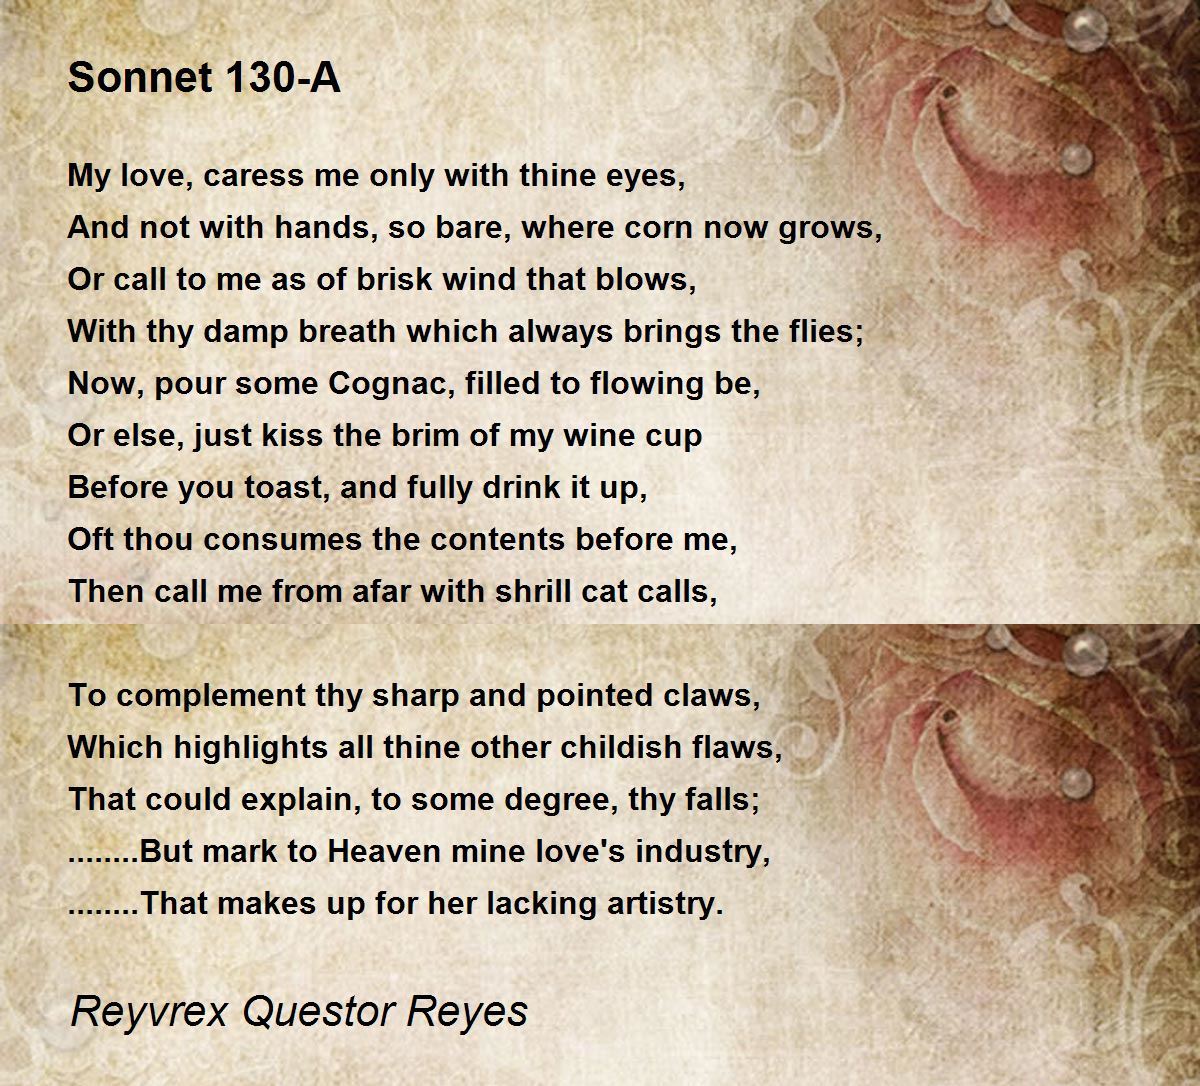 poetry essay on sonnet 130 diction